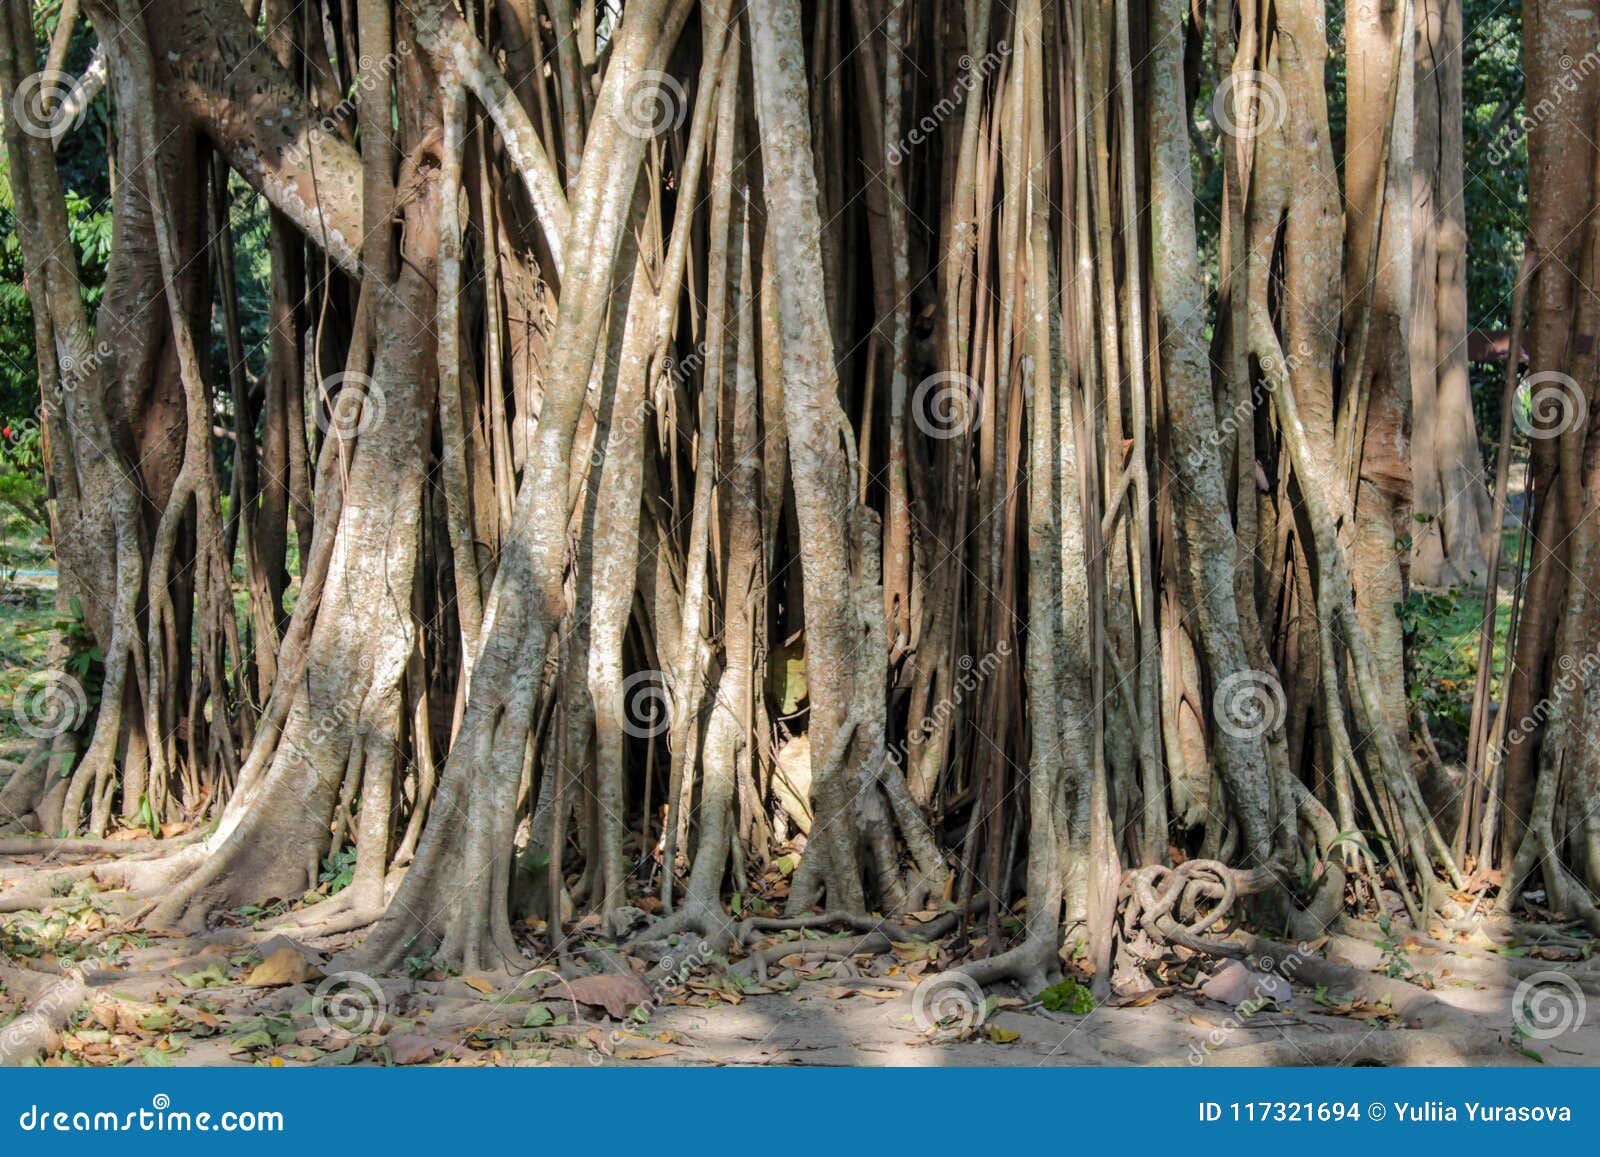 jungle forest tree banyan roots in tropical rainforest